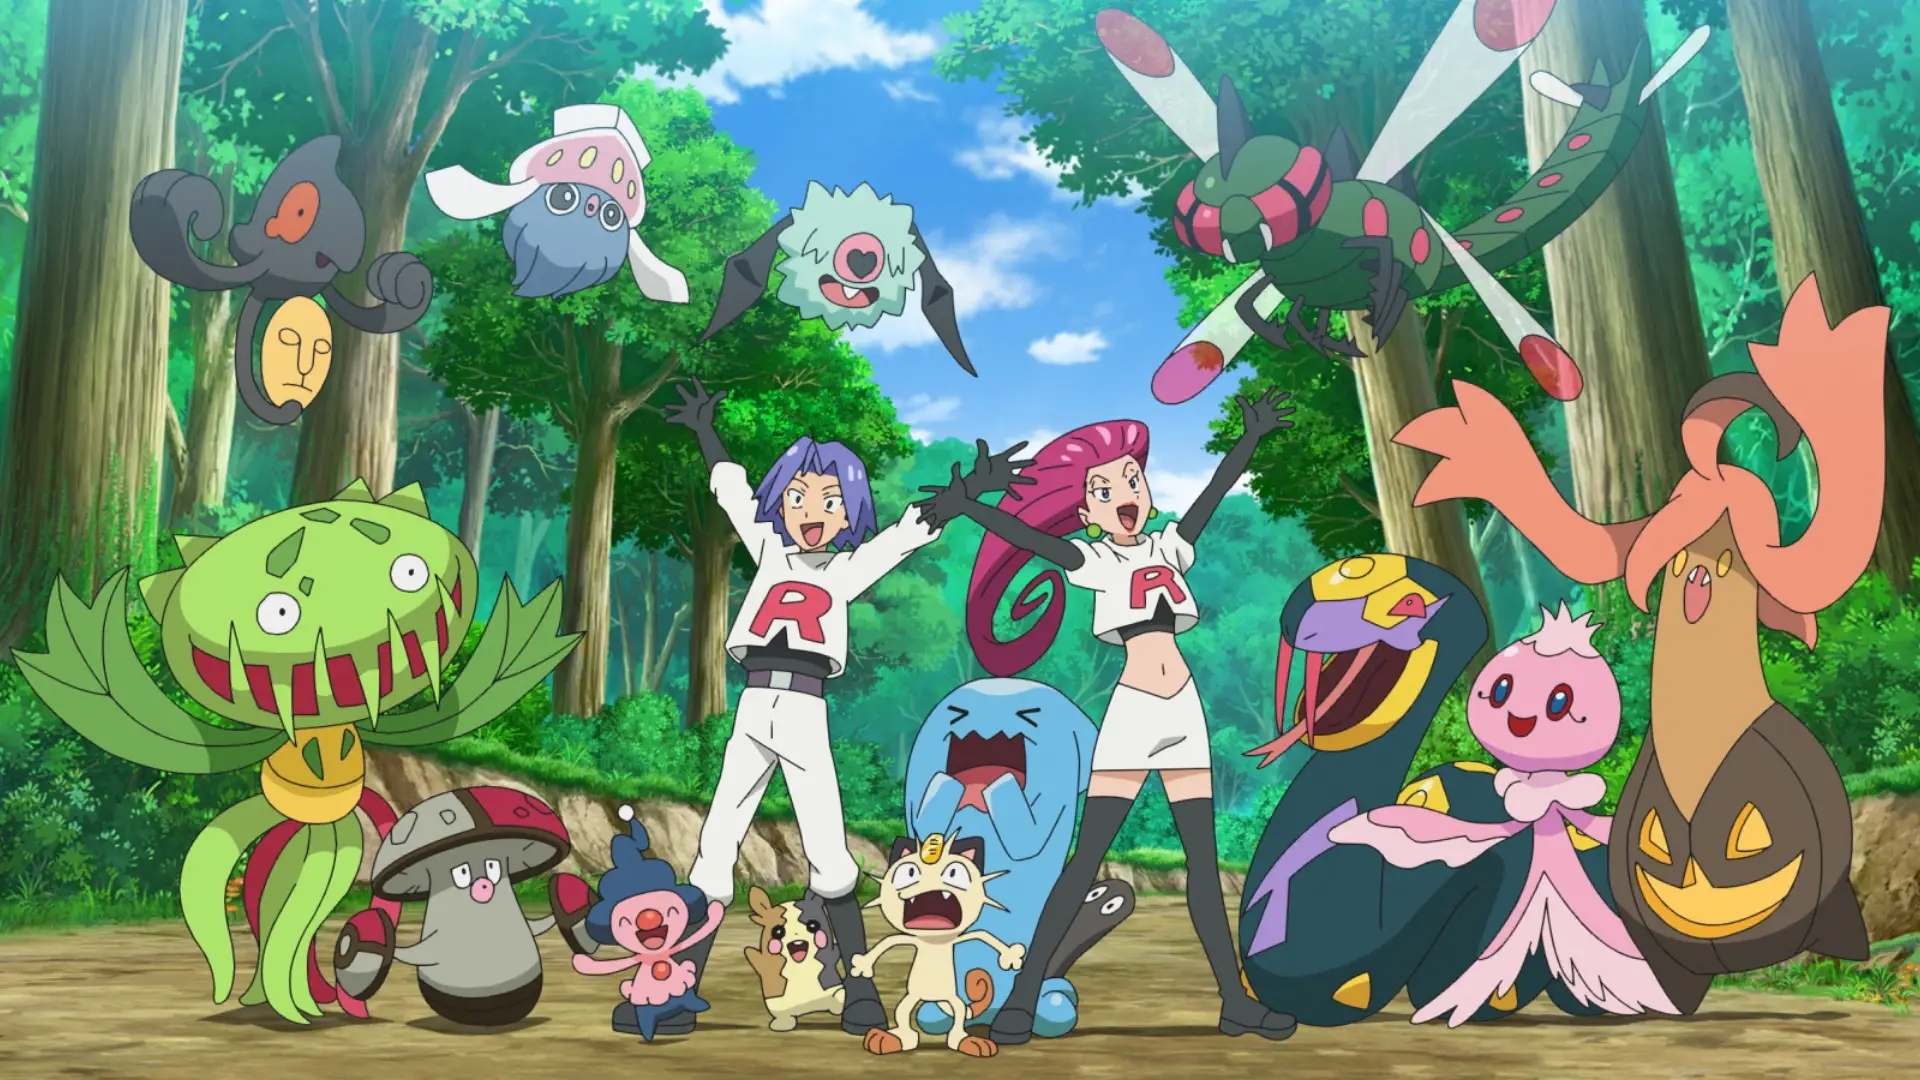 Screenshot showing Team Rocket with all of their partner Pokémon